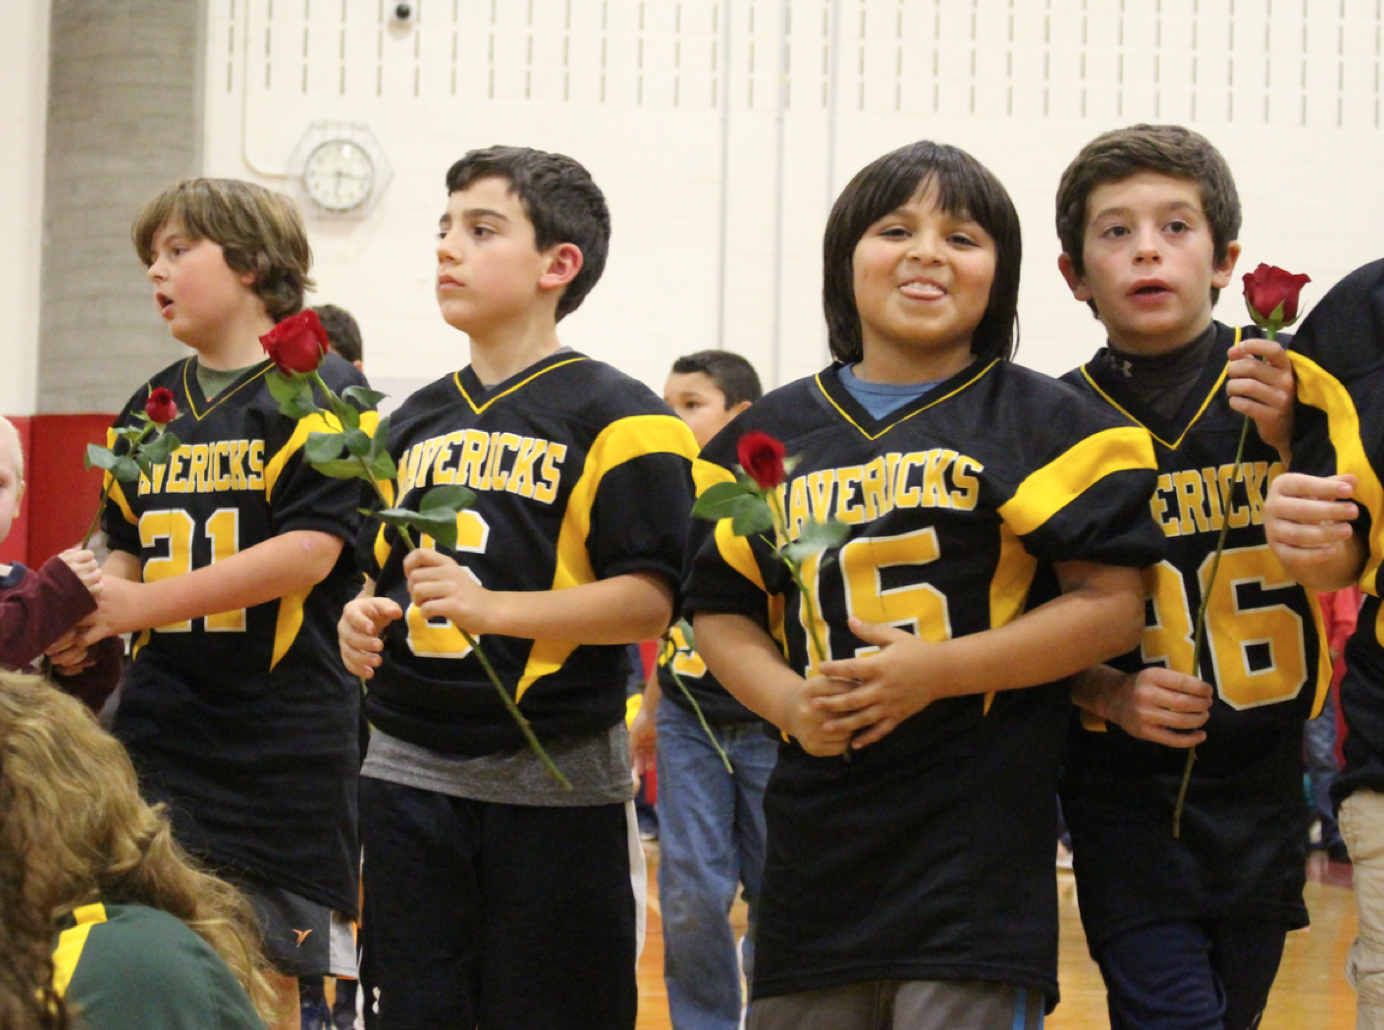 GYFL players at the annual GYCL cheerleading expo at Greenwich High School. 